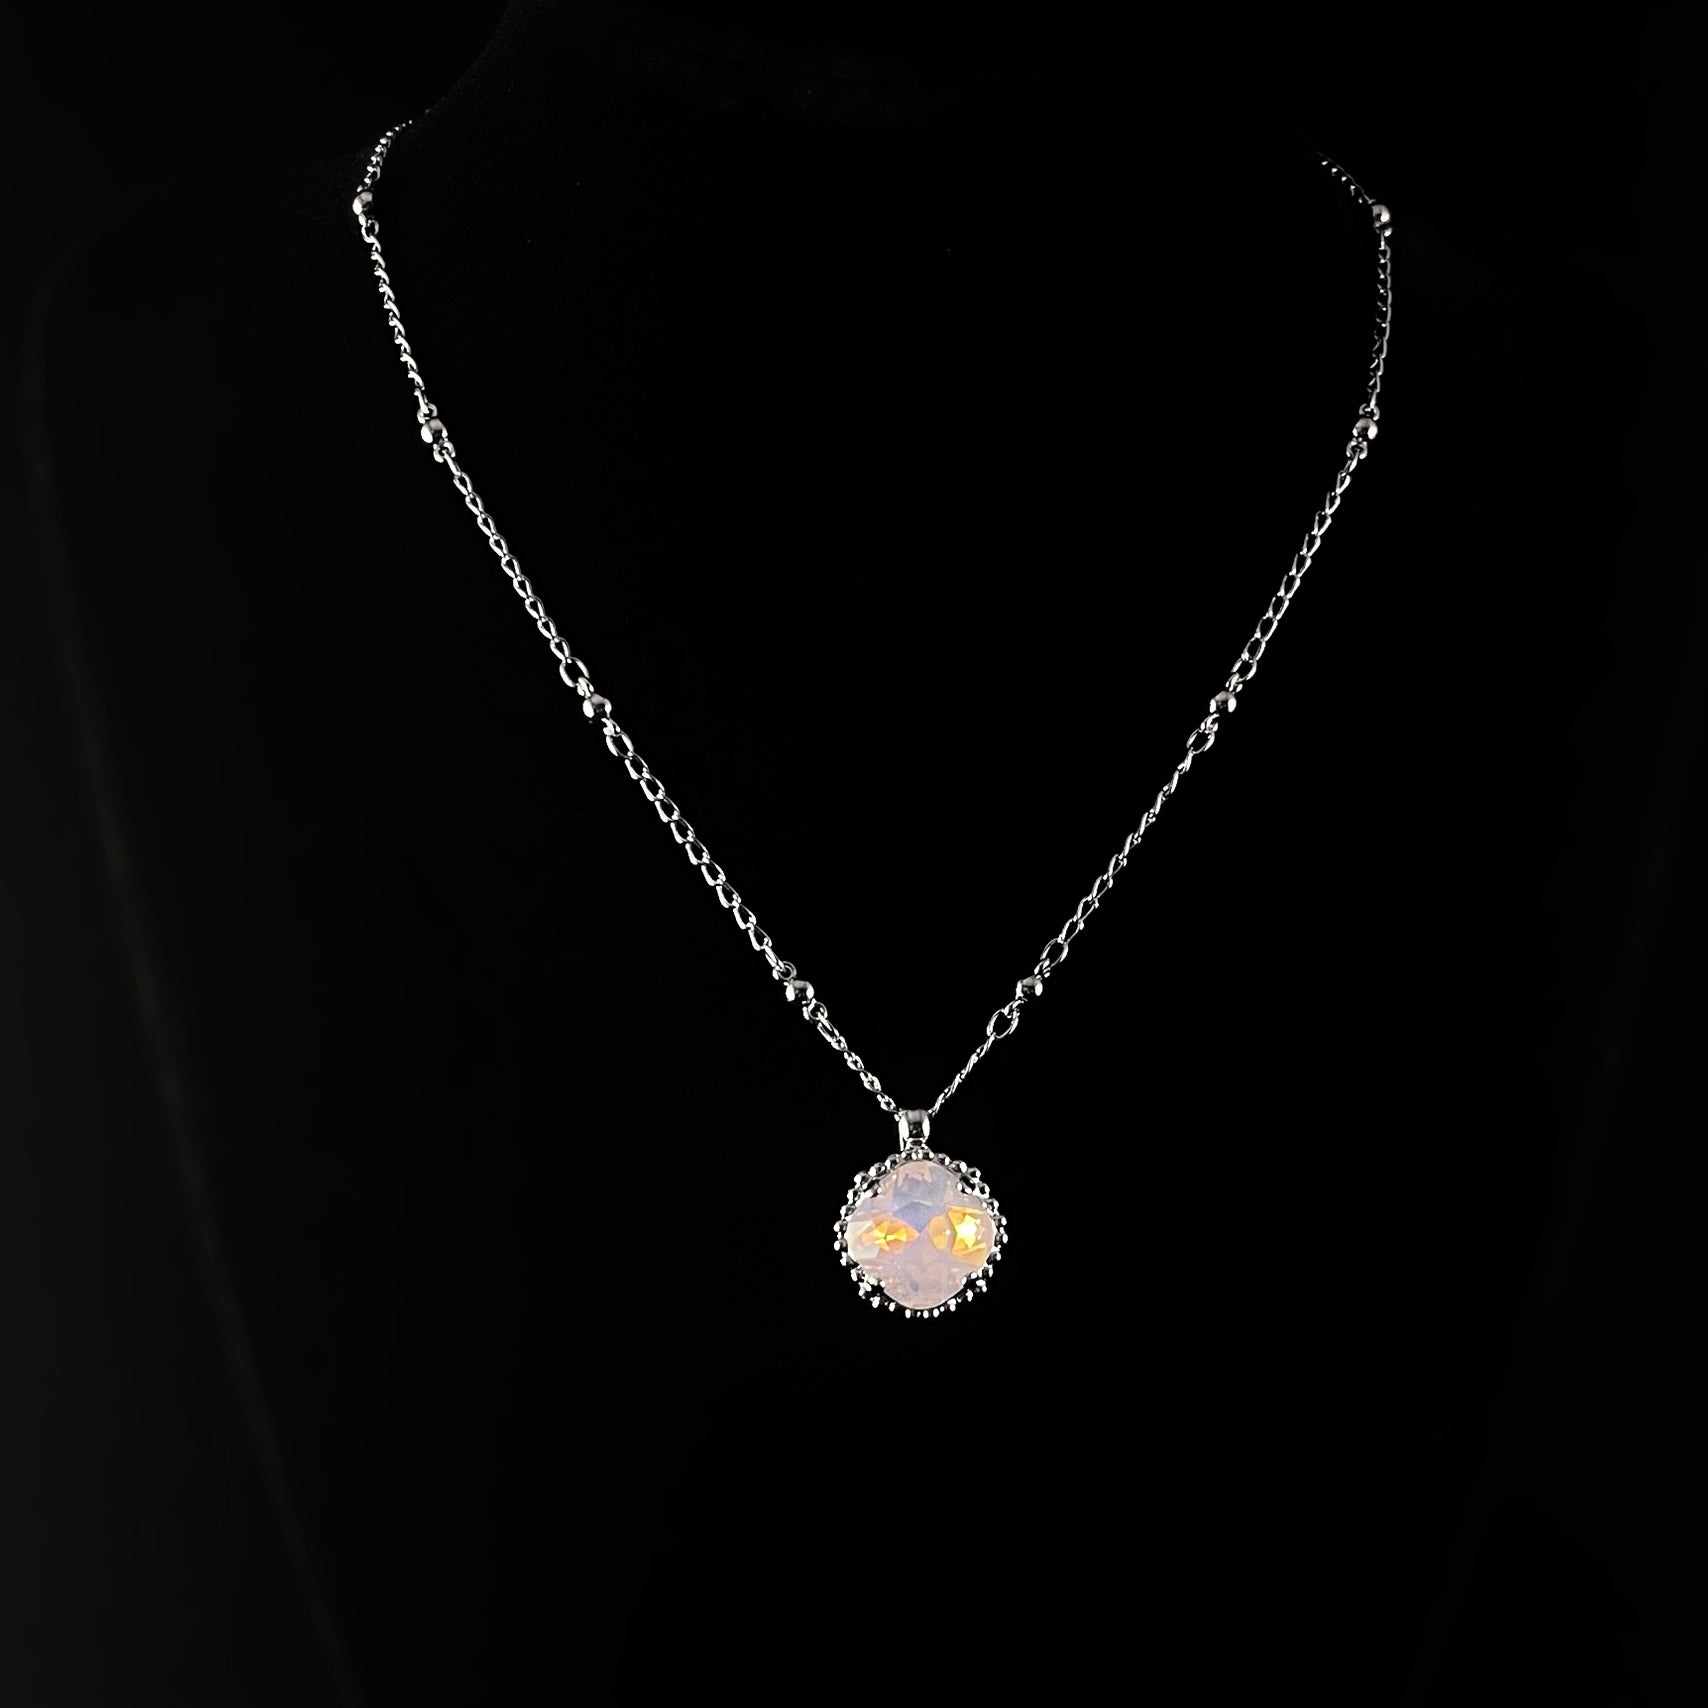 Cushion Cut Crystal Pendant Necklace with Decorative Border